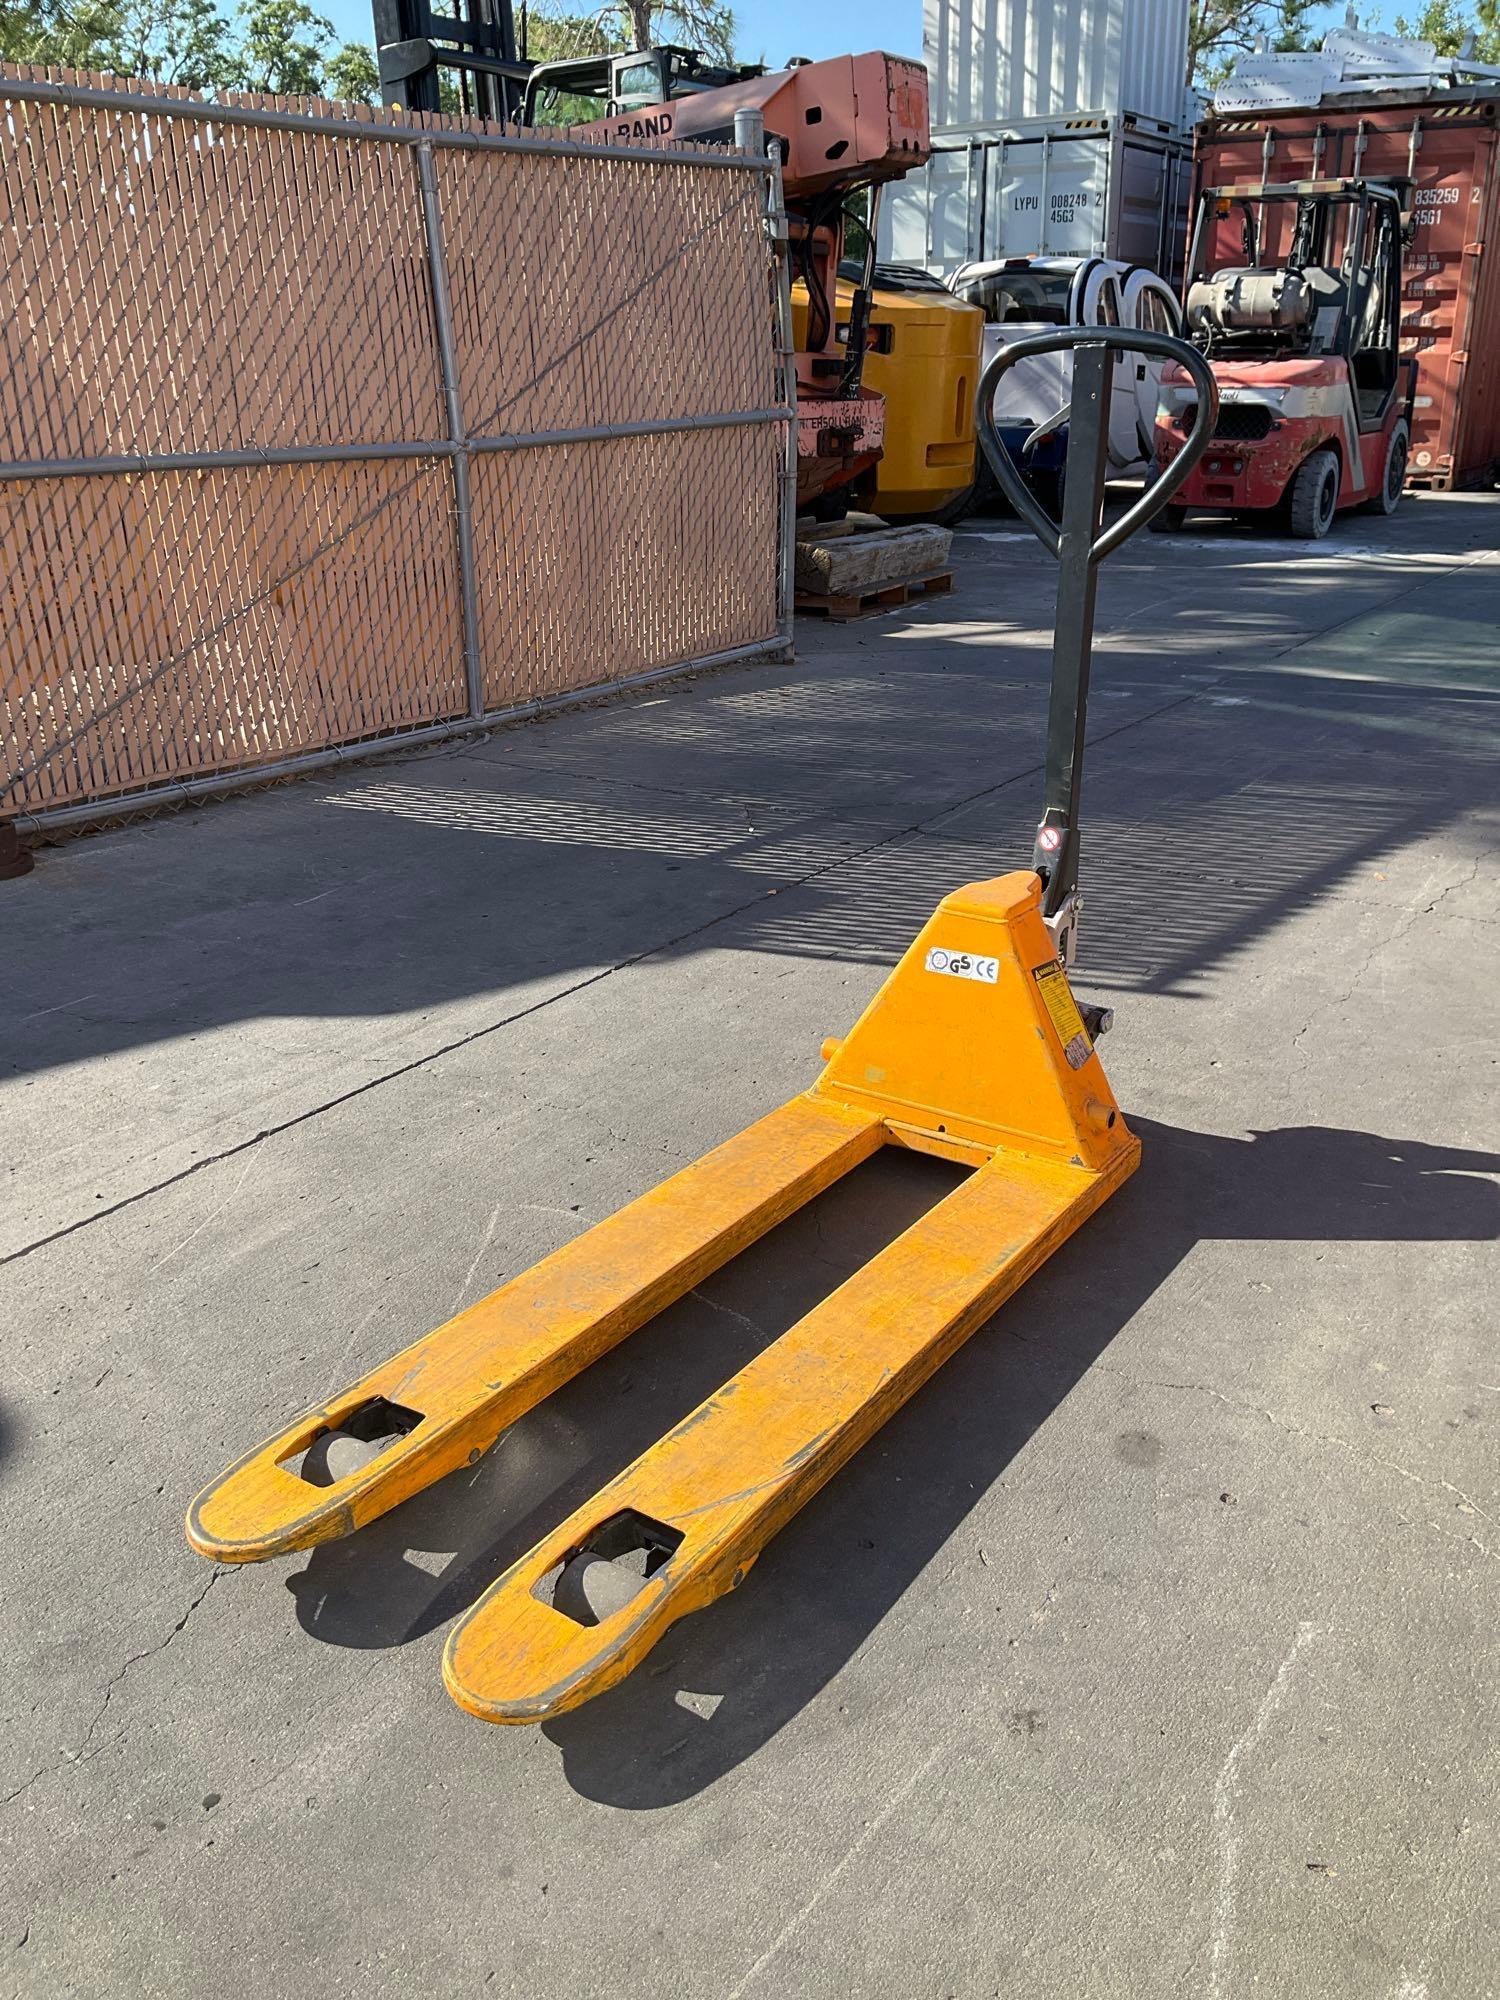 XILIN HYDRAULIC PALLET JACK MODEL XET55, APPROX MAX CAPACITY 5500LBS